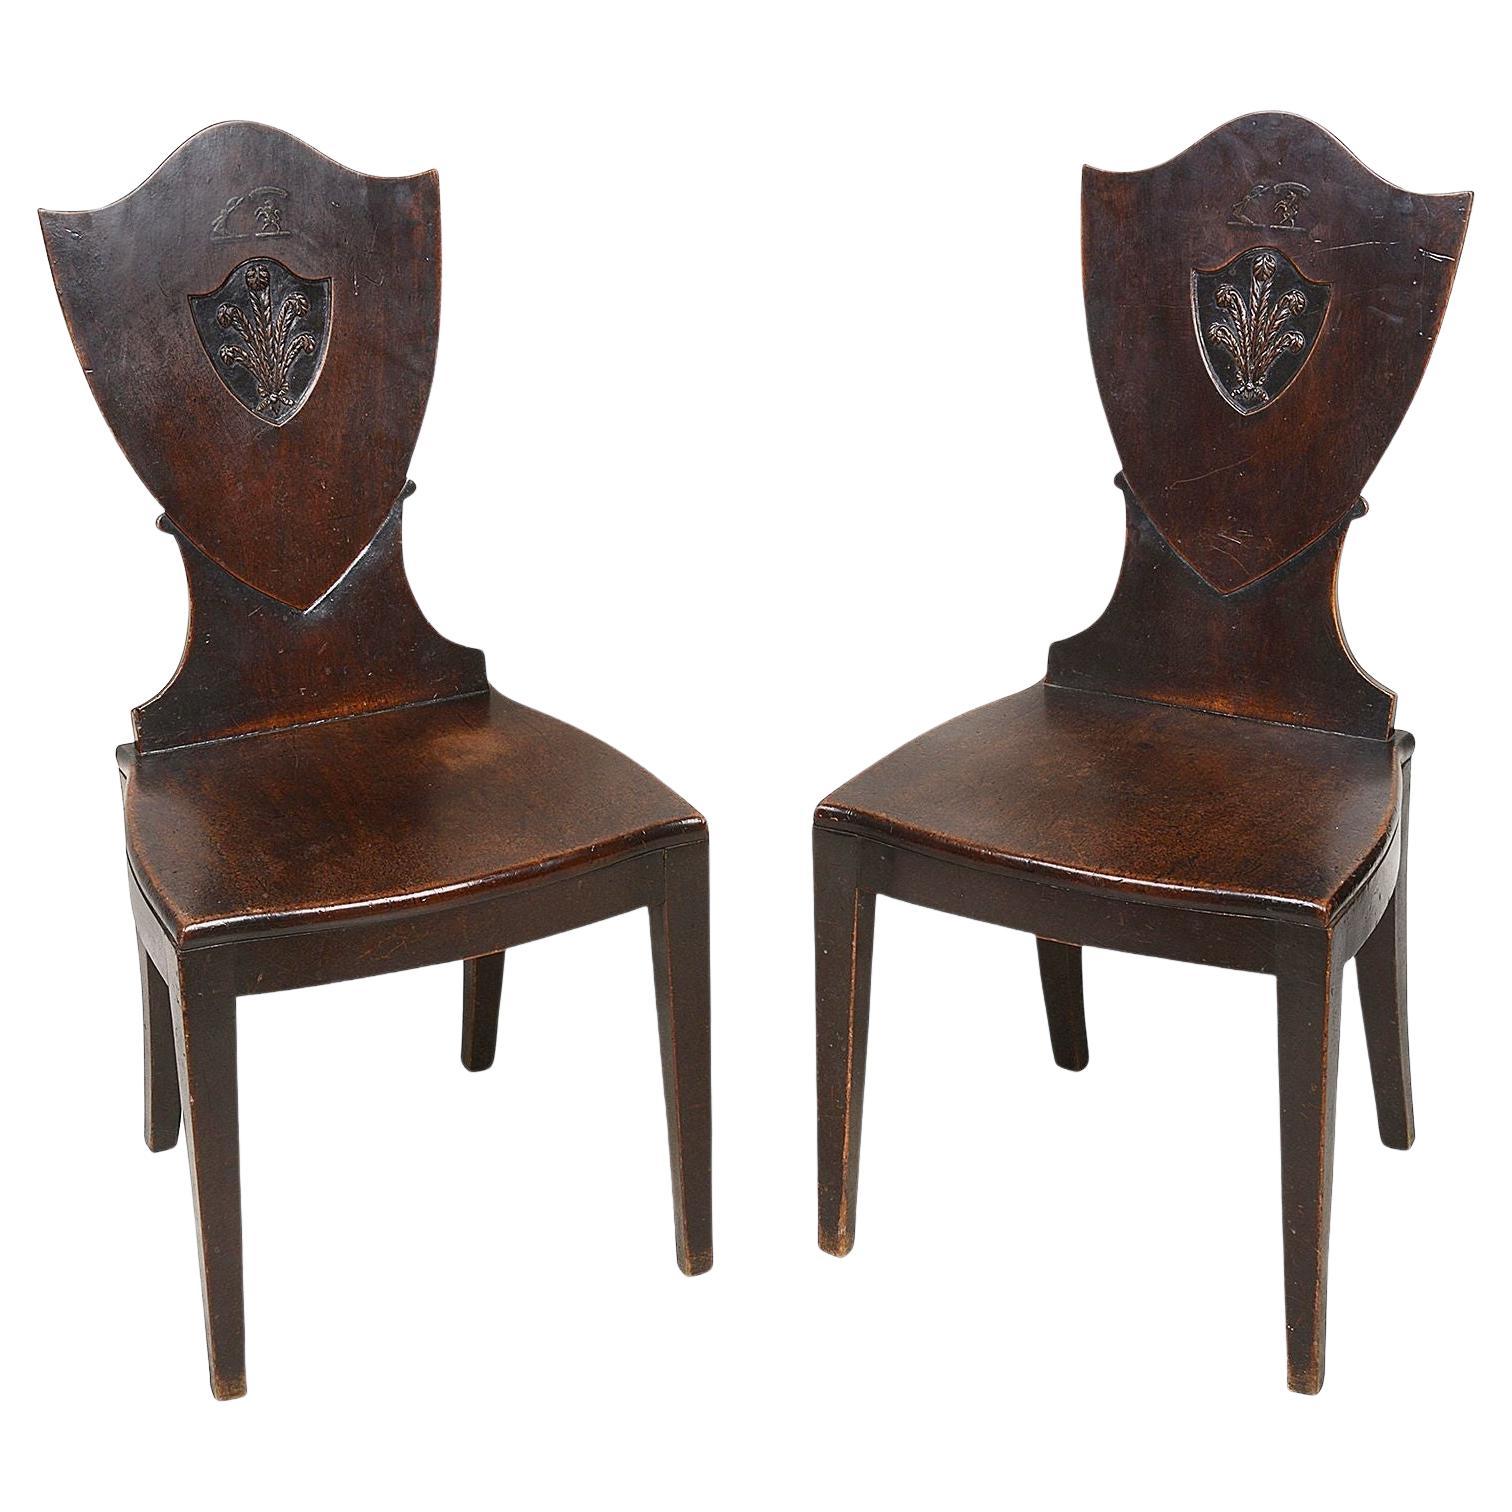 Pair 18th Century Mahogany Sheild Back Hall Chairs with Prince of Wales Feathers